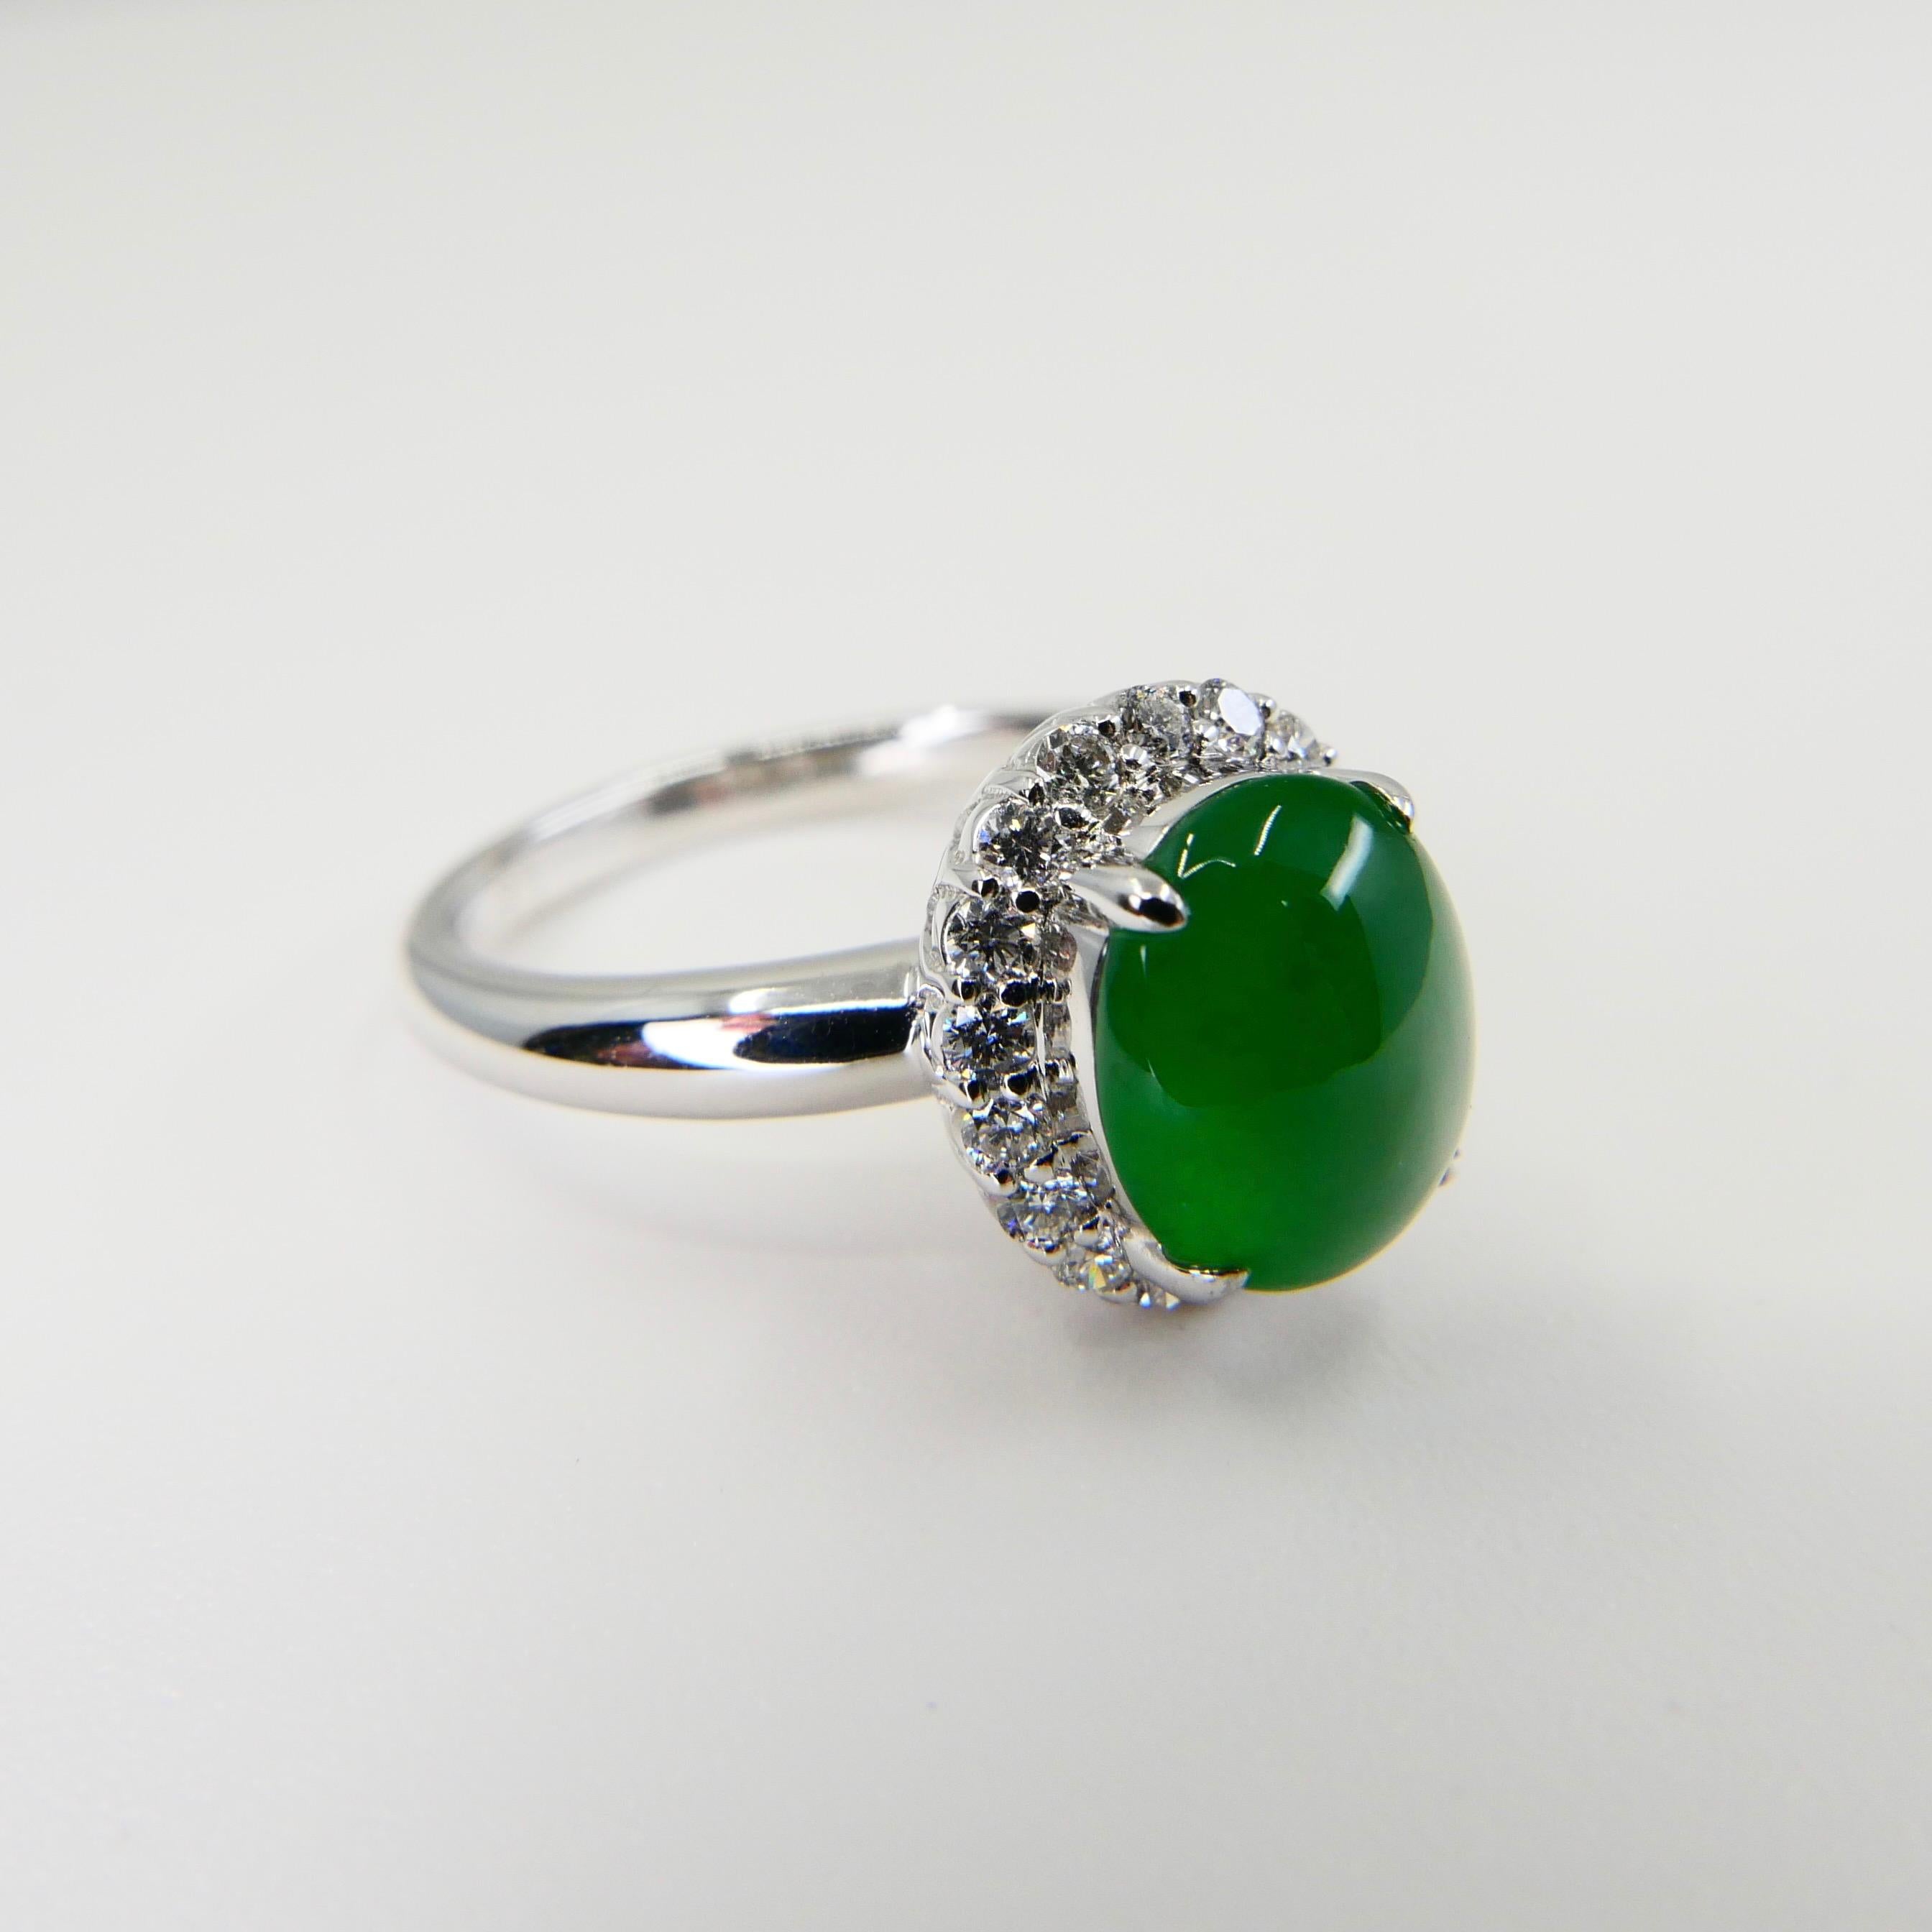 Certified Type A Jadeite Jade and Diamond Cocktail Ring, Close to Imperial Jade For Sale 5